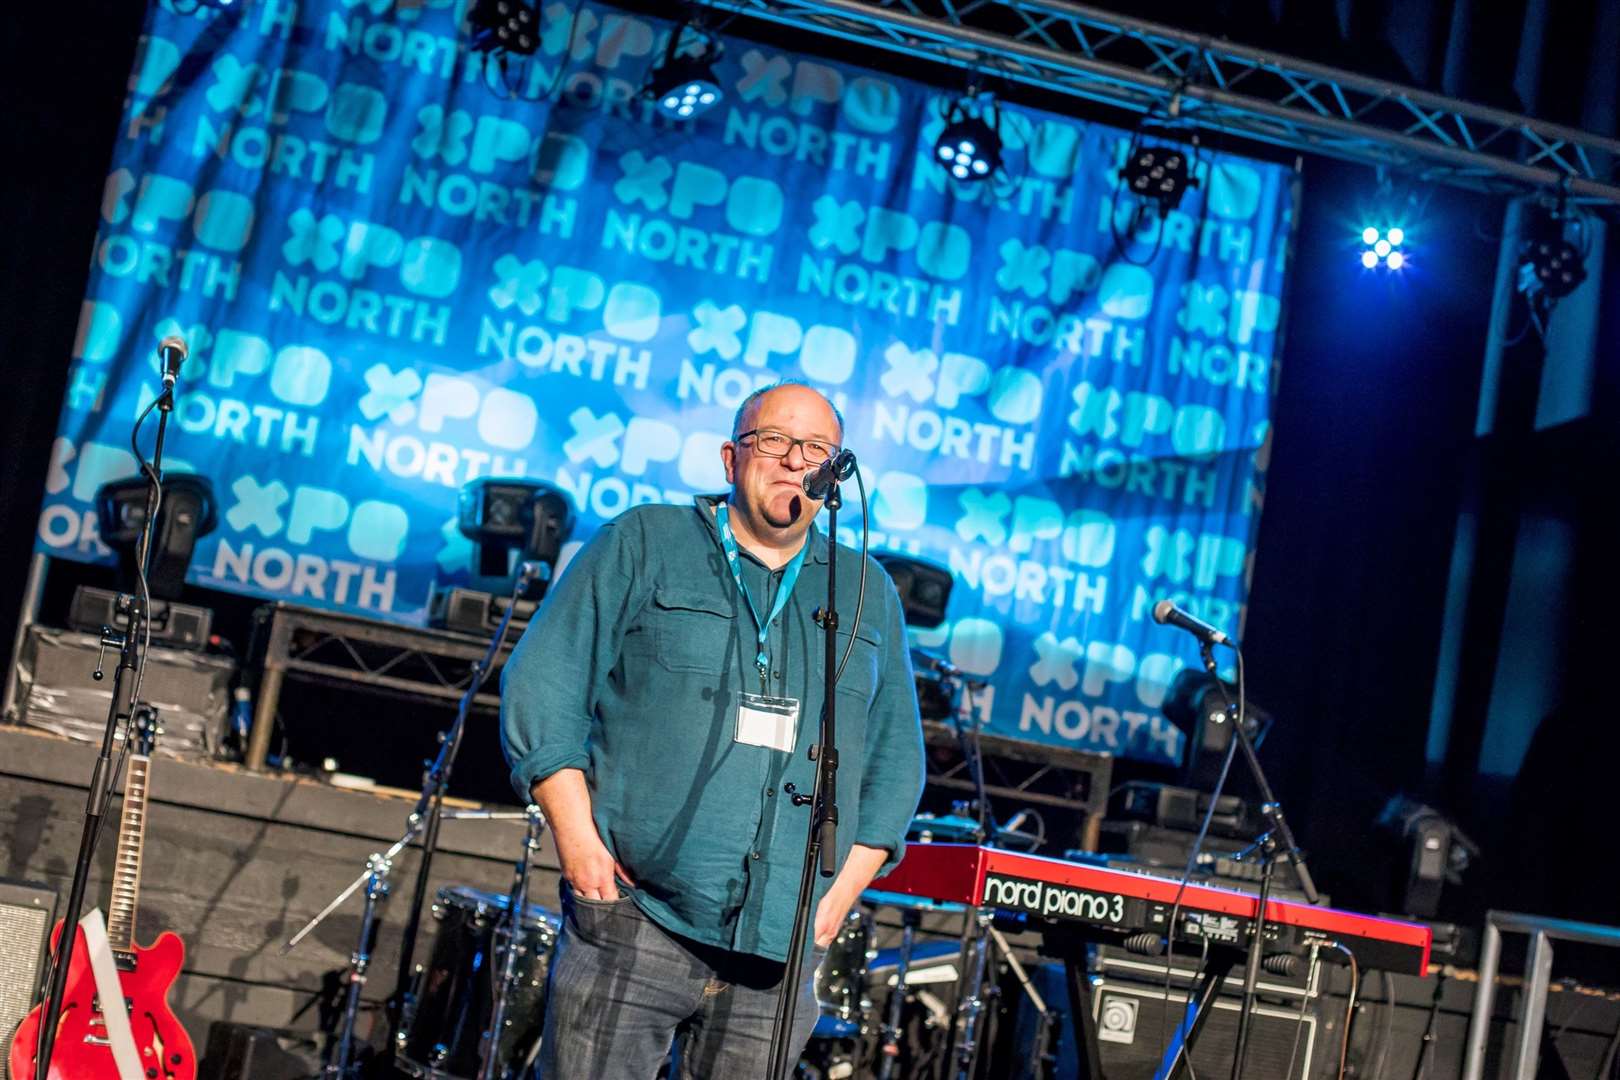 HIE's head of creative industries, Iain Hamilton, hope for hybrid return of the event in future. Picture: Paul Campbell/XPONorth